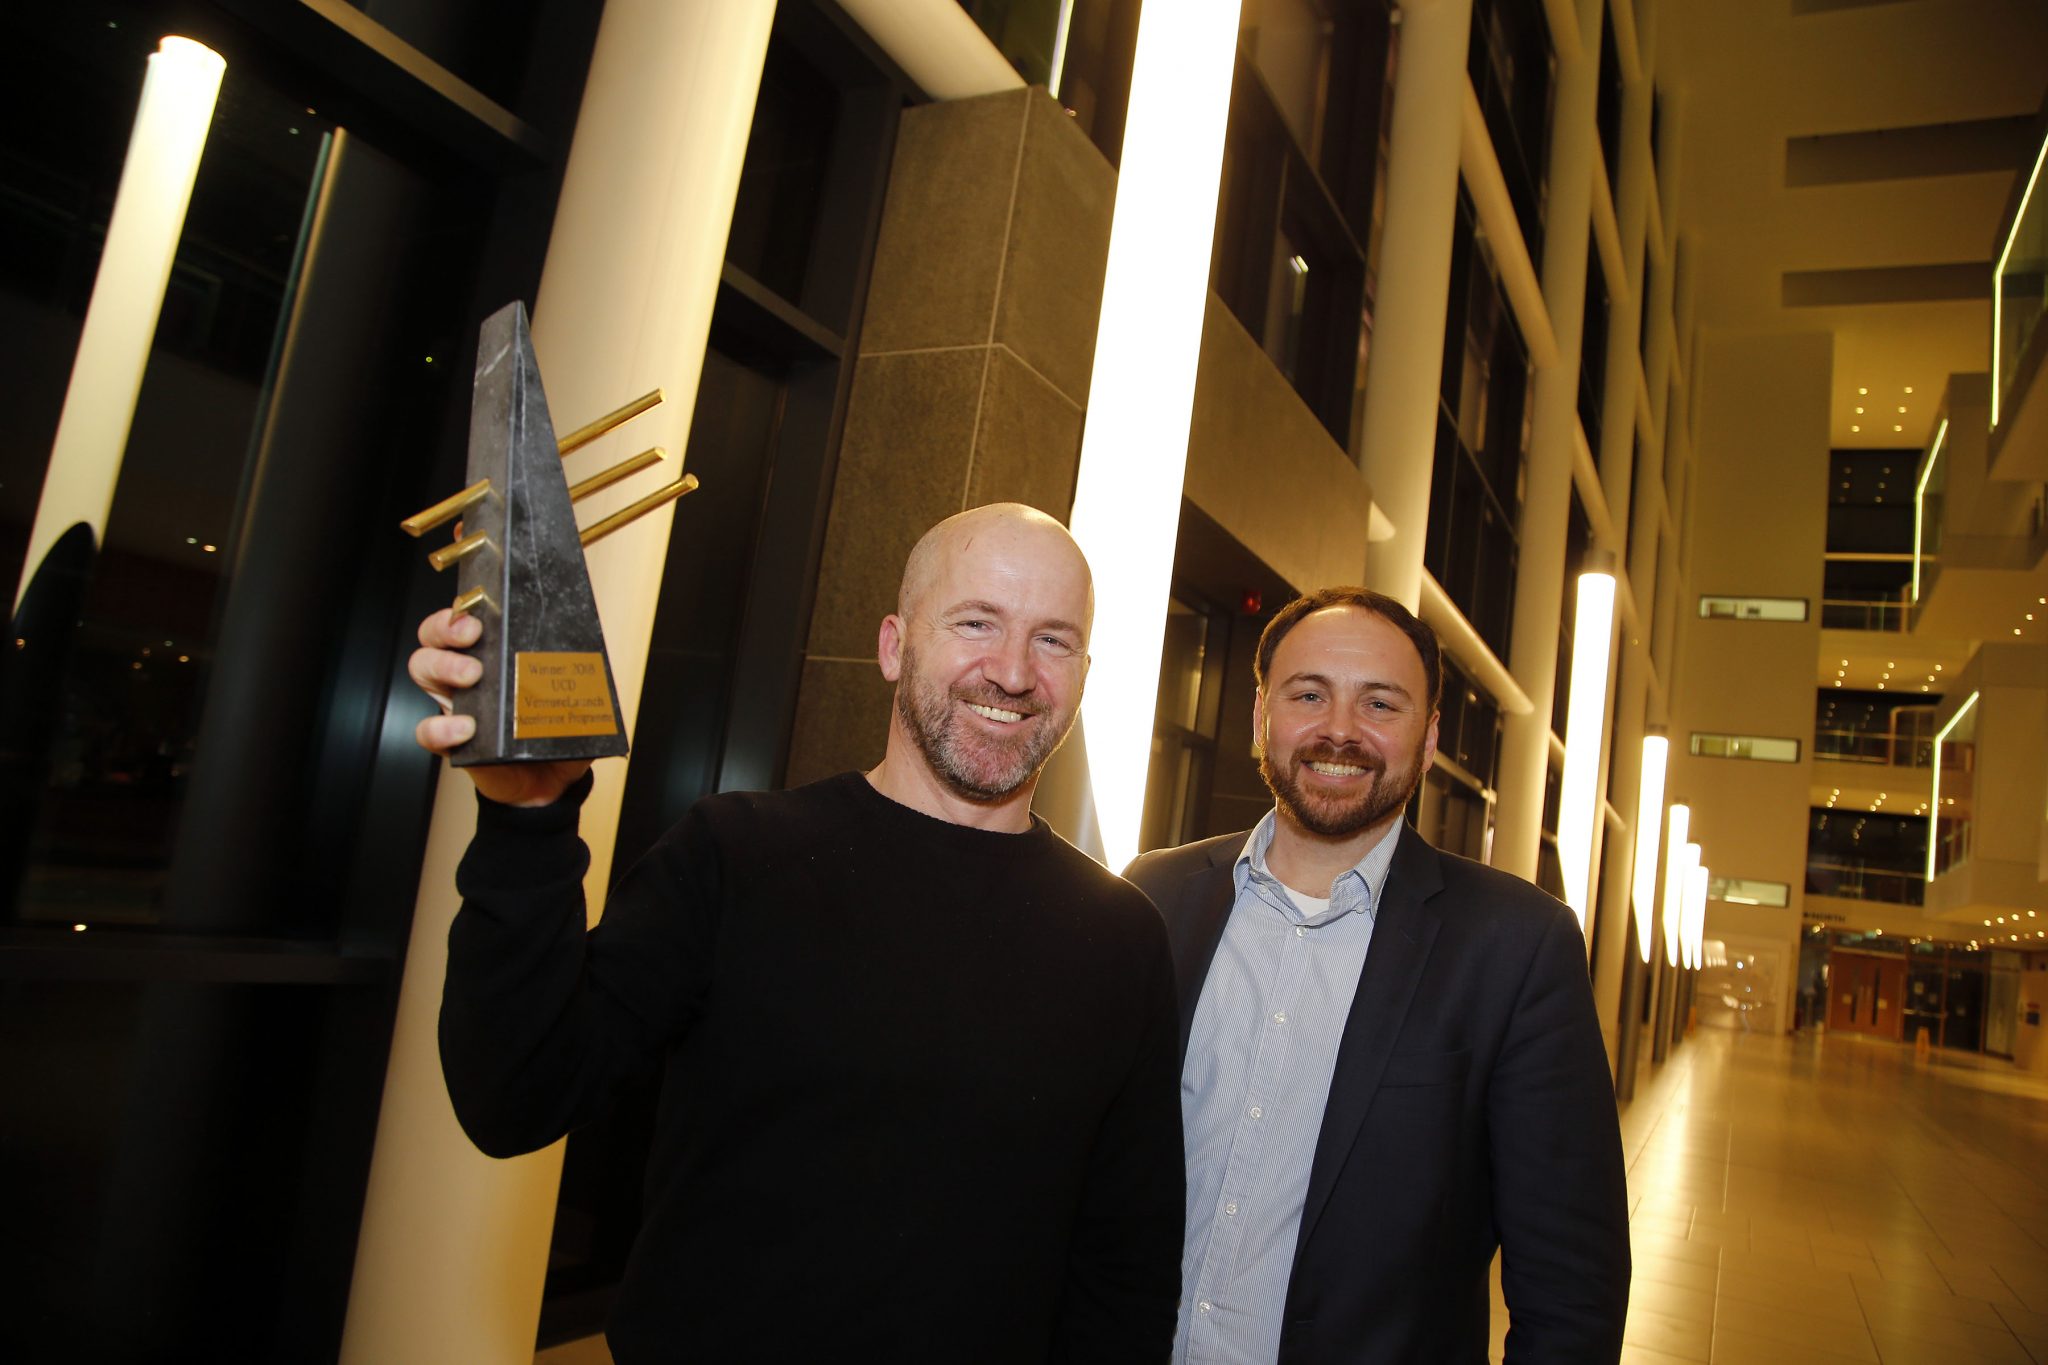 Founders of Naiad, Professor Reynaud and Professor Rodriguez holding the 2018 Start-Up of the Year Award. Photo via UCD.